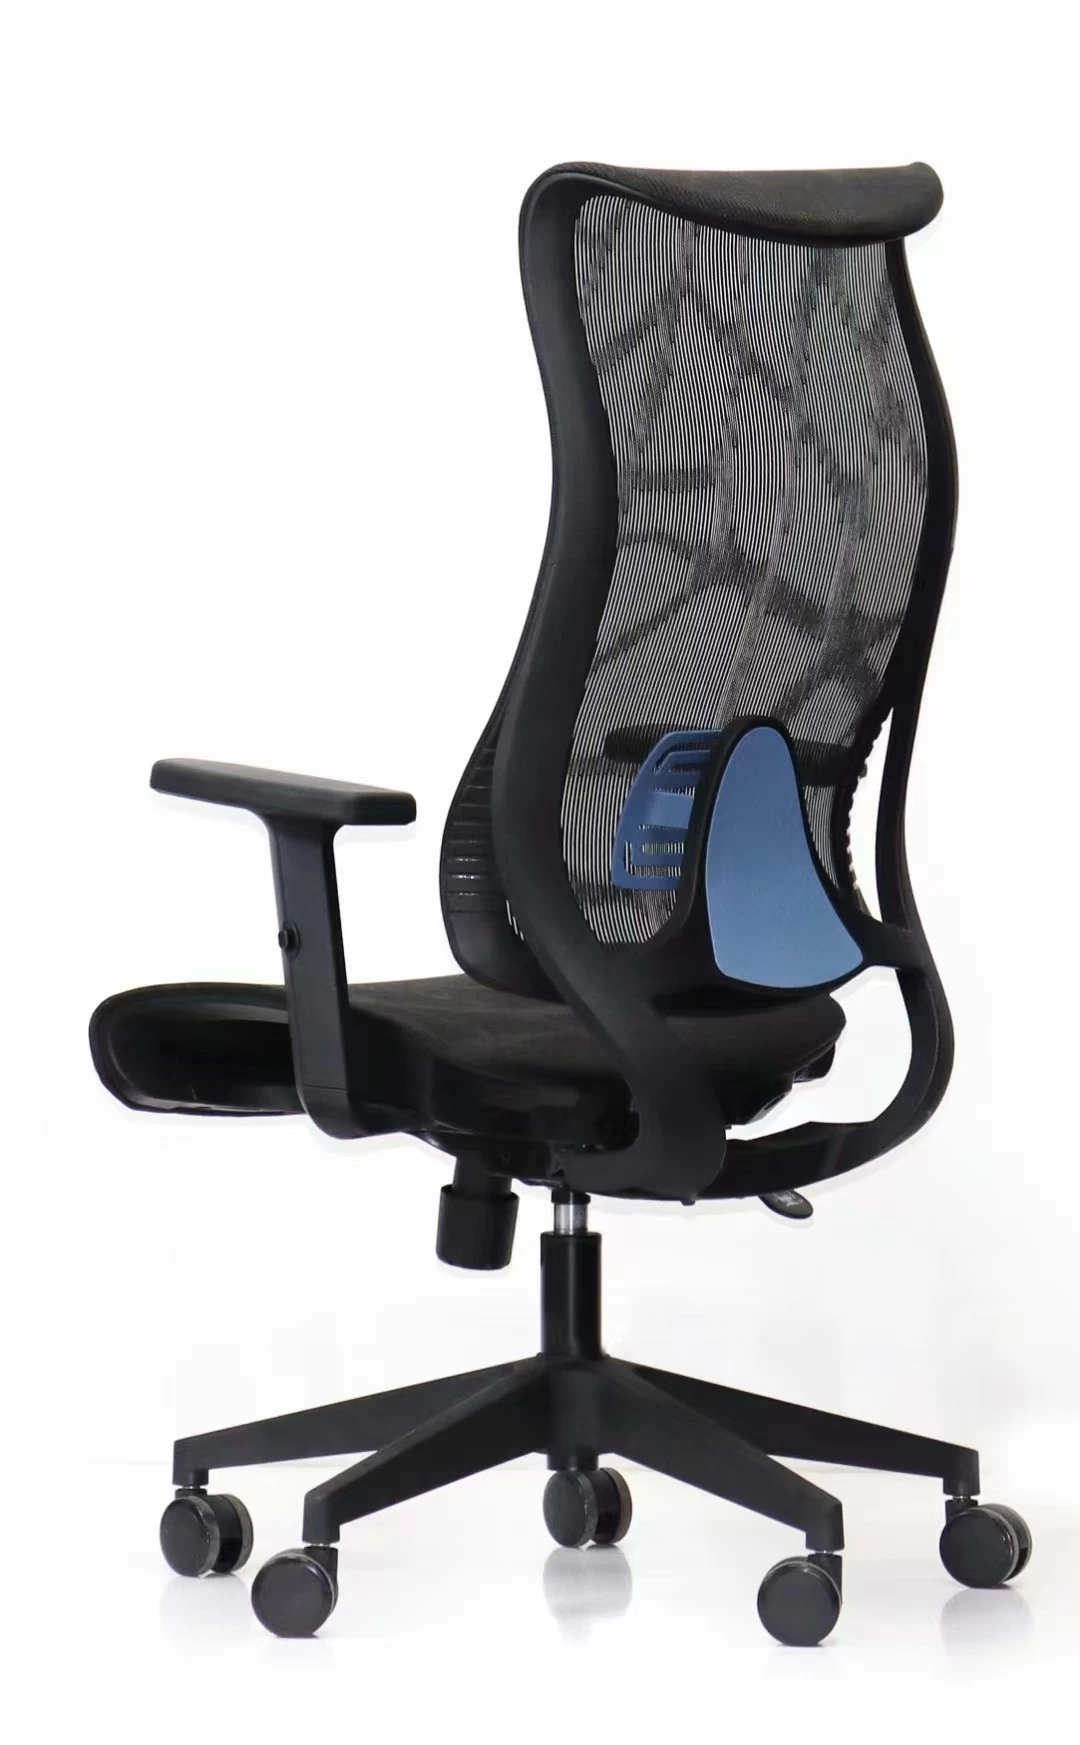 Newcity 639AF Executive Manager Mesh Chair Comfortable Modern Fabric Mesh Chair High Back New Design Adjustable Armrest Mesh Chair Foshan China